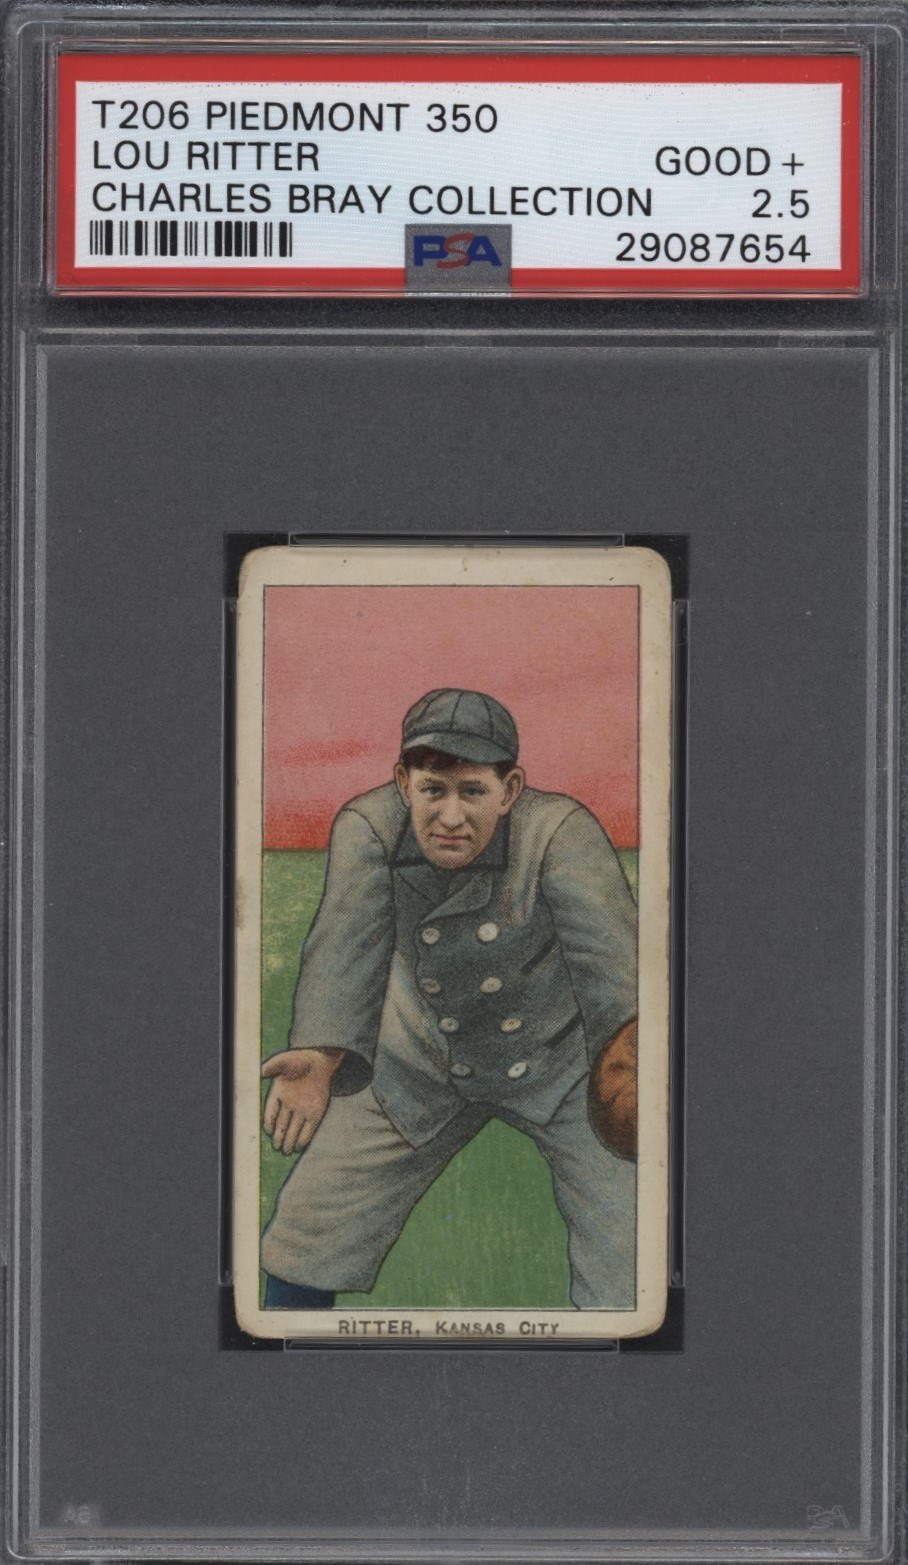 - T206 Piedmont 350 Lou Ritter PSA 2.5 From the Charles Bray Collection